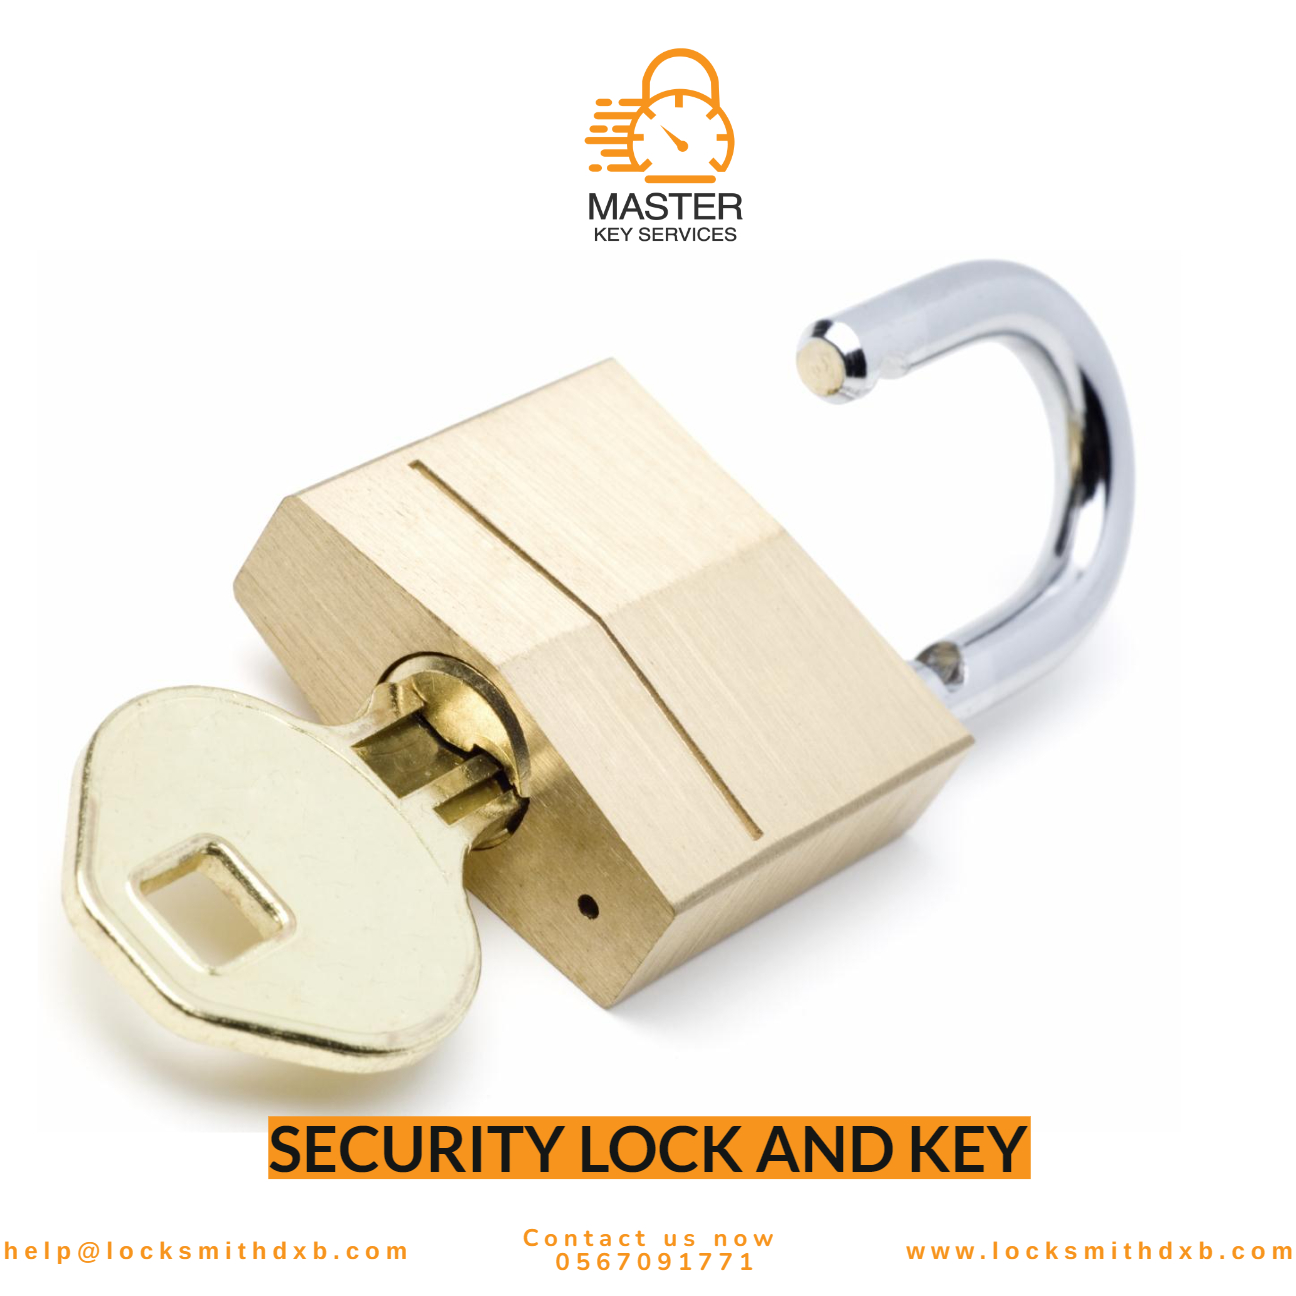 Security lock and key